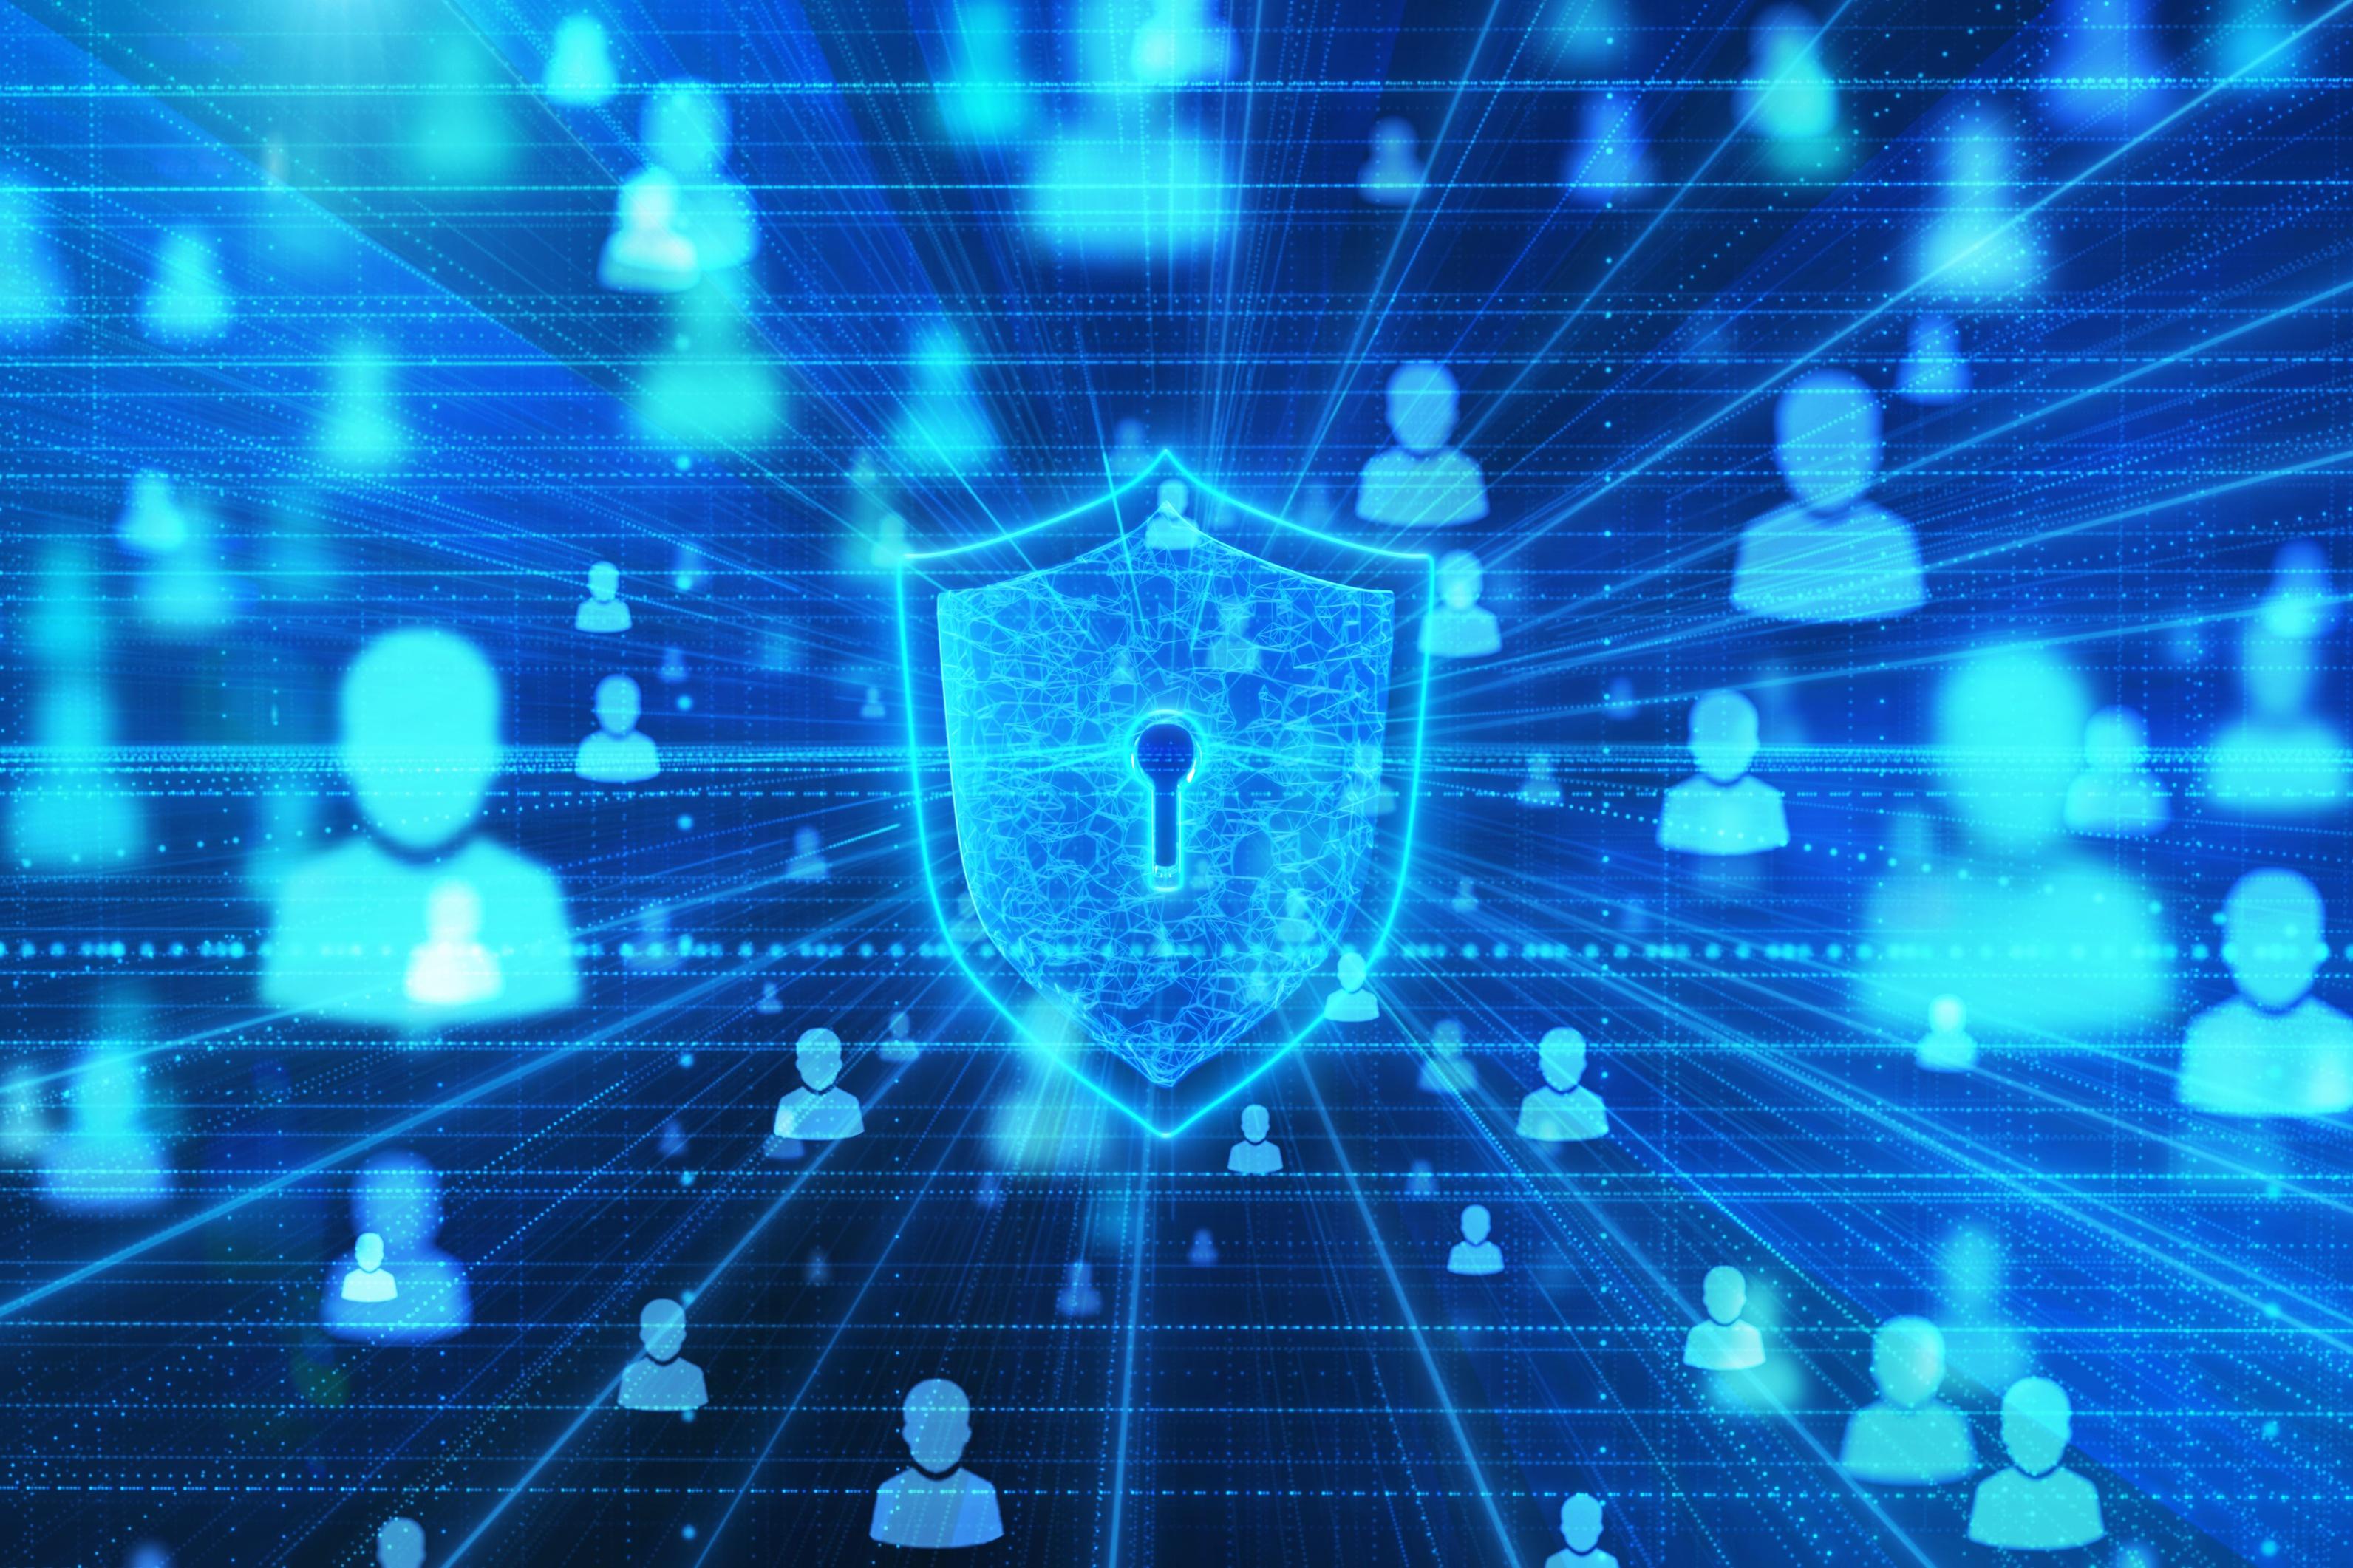 Shield with a keyhole in the center, surrounded by digital representations of people, which represents the comprehensive protection offered by endpoint security for mobile device